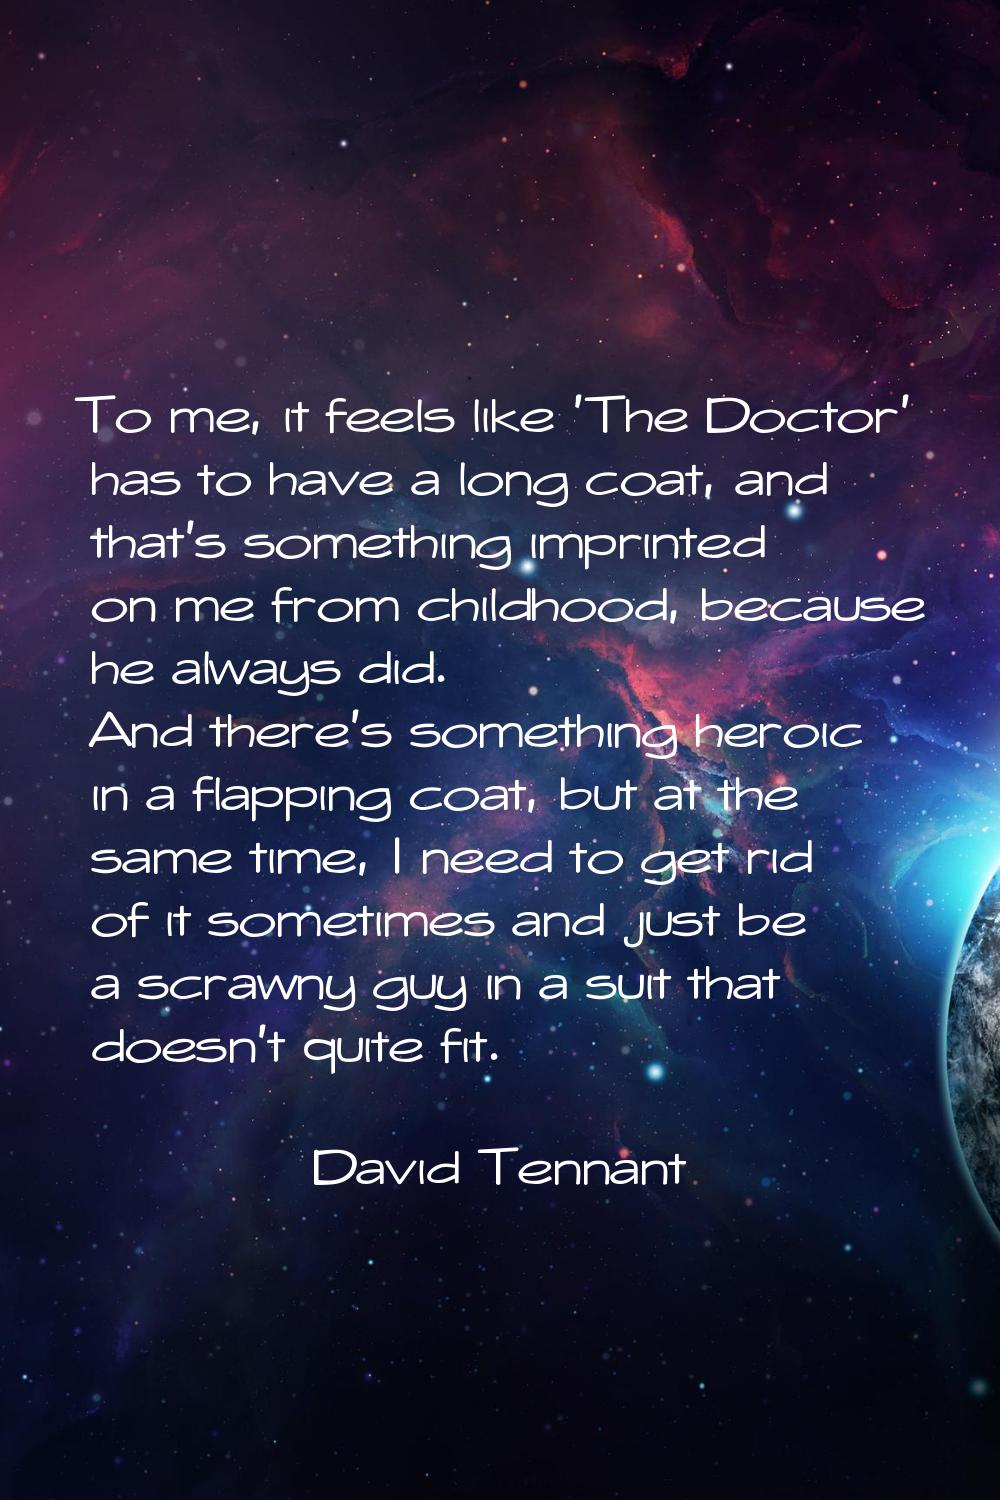 To me, it feels like 'The Doctor' has to have a long coat, and that's something imprinted on me fro